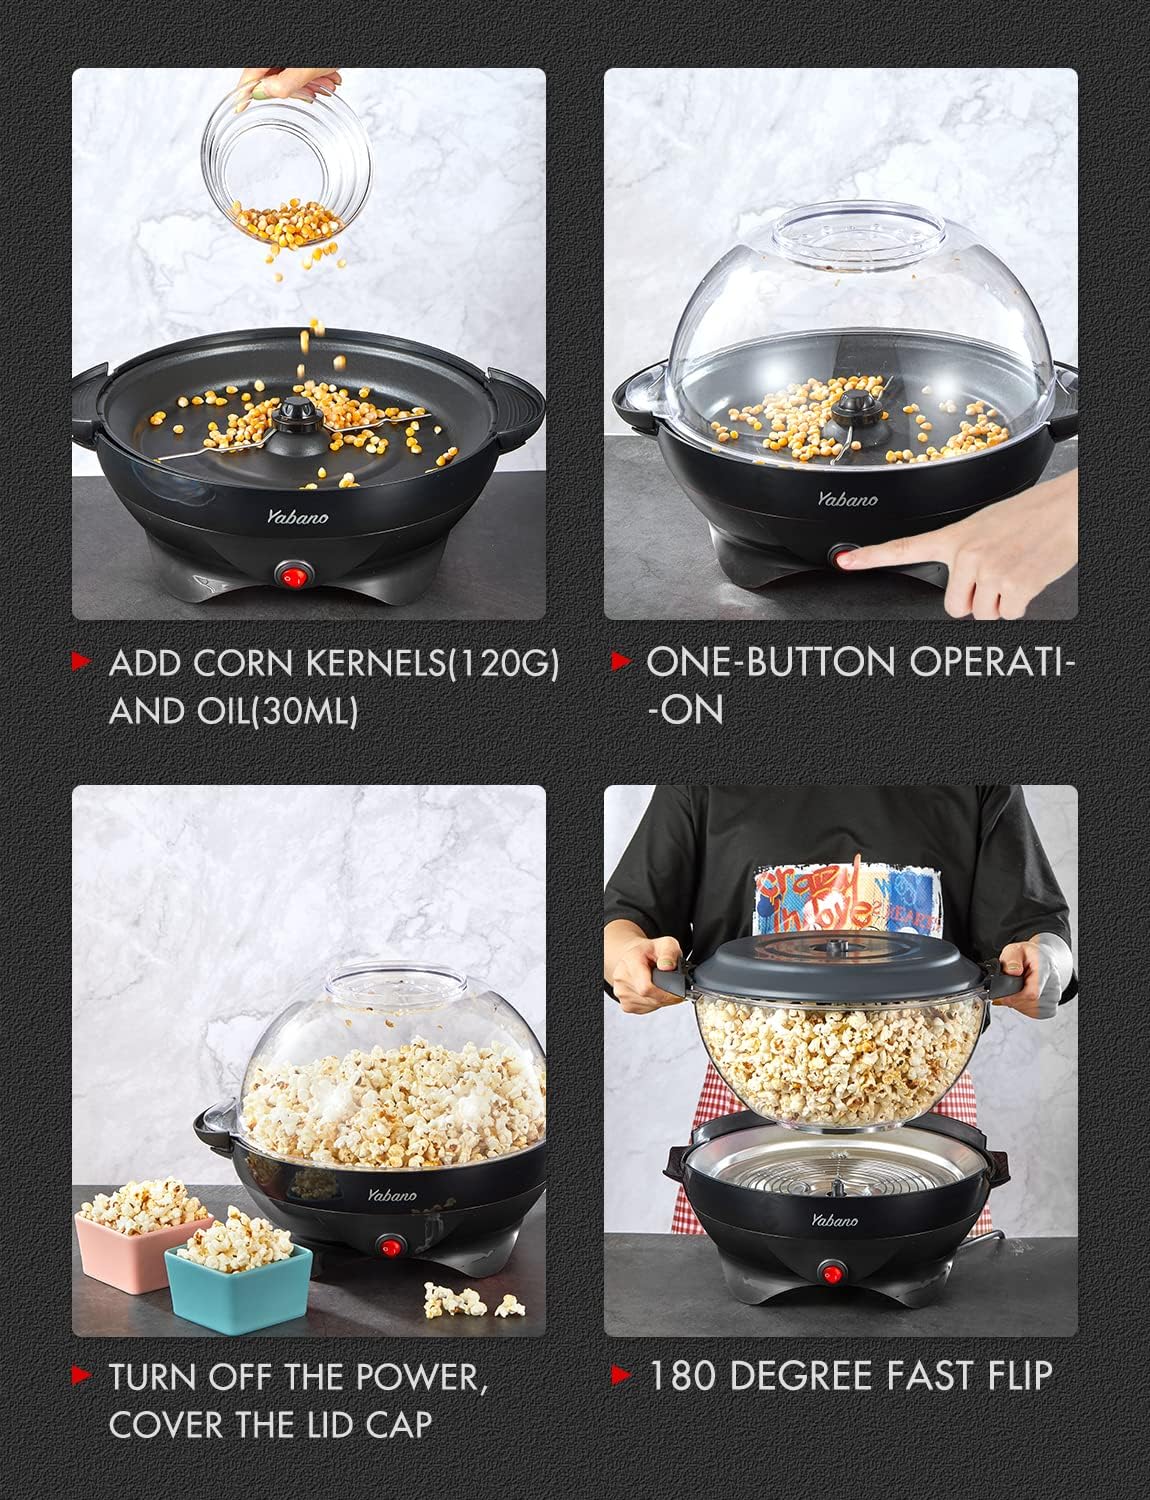 Yabano Popcorn Maker Machine, 5L Popcorn Popper, Nonstick Plate, Electric Stirring with Quick - Heat Technology, Cool Touch Handles, Healthy Less Fat, 800W, BLACK - Amazing Gadgets Outlet